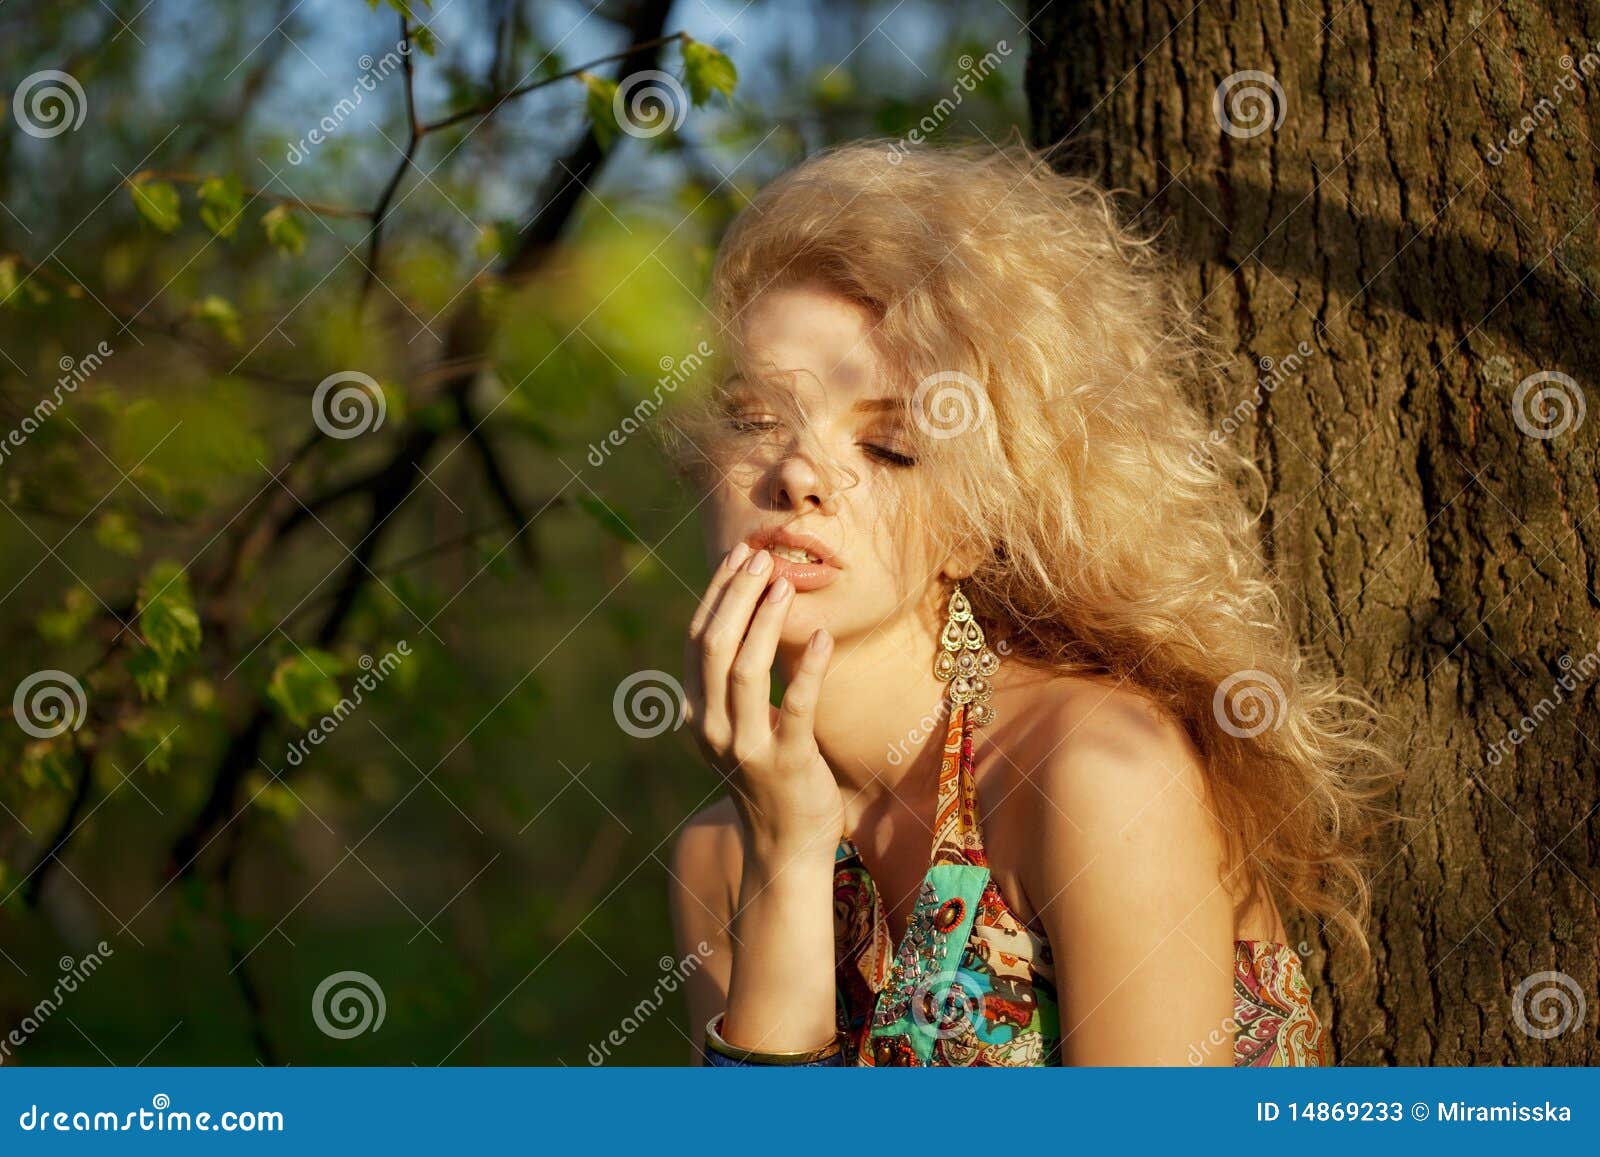 Beautiful Girl in the Park at Sunset Stock Image - Image of lonely ...